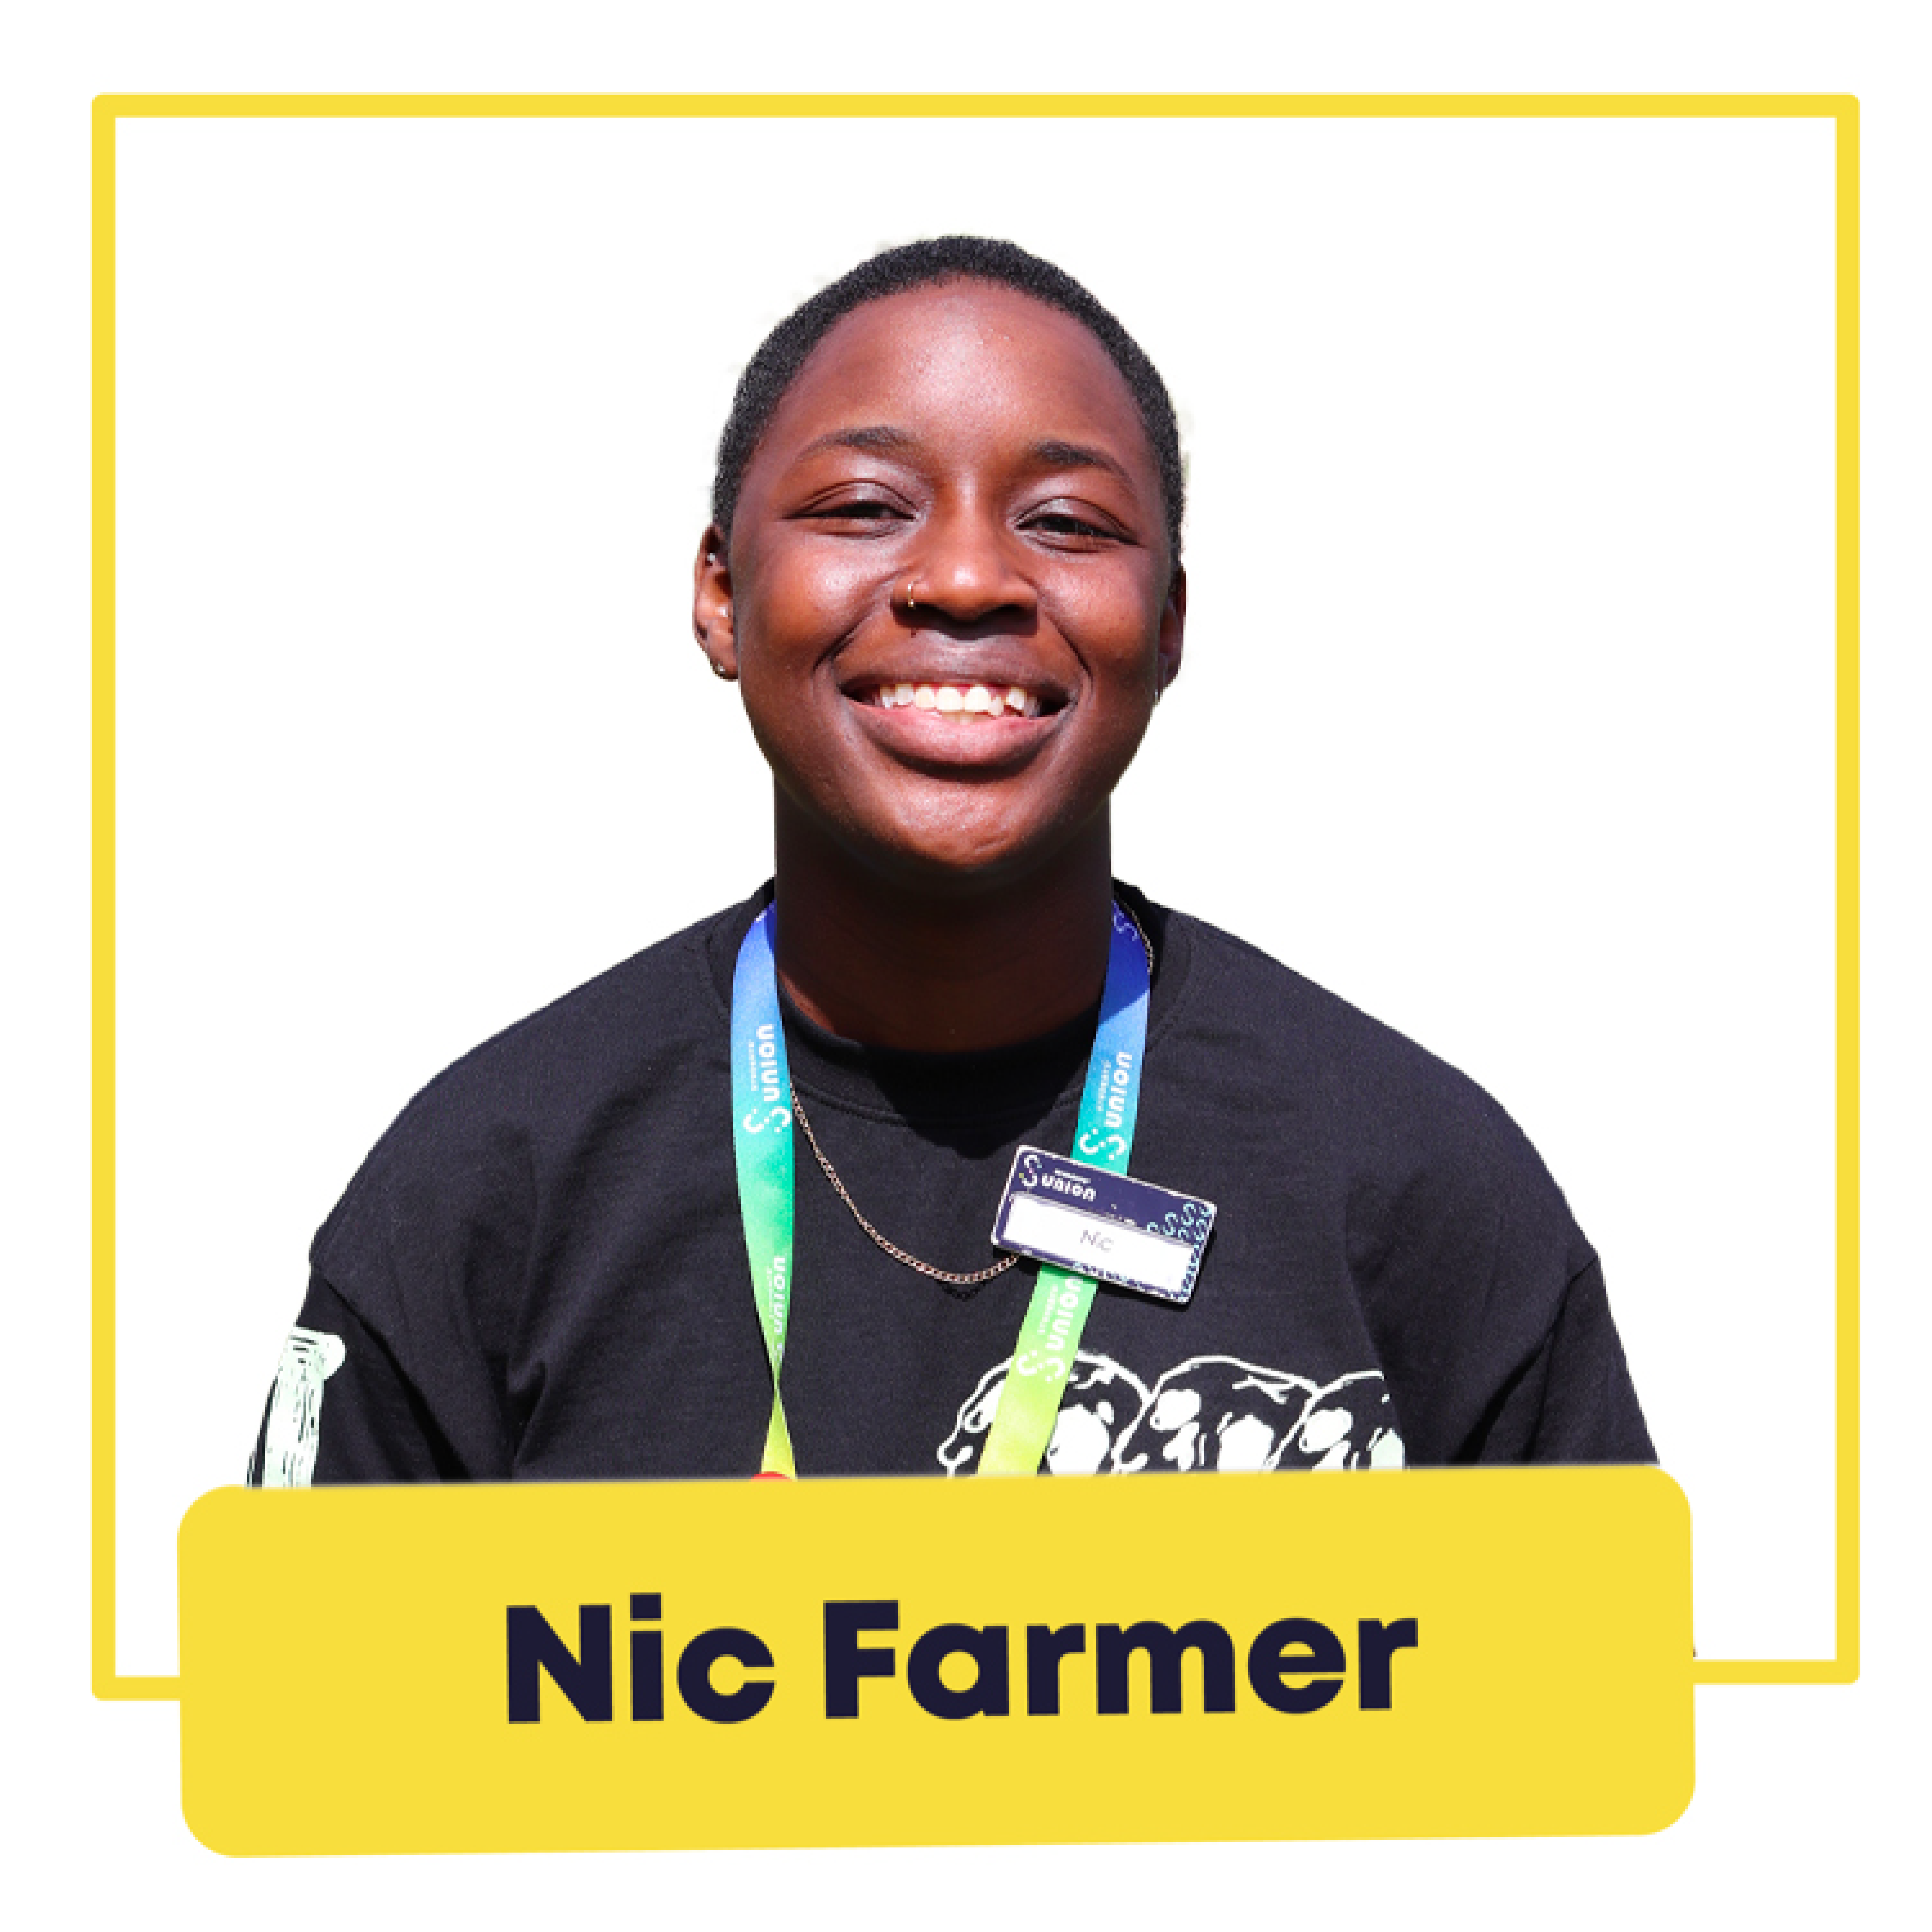 Nic Farmer - Liberation Officer - Pronouns: He/They 